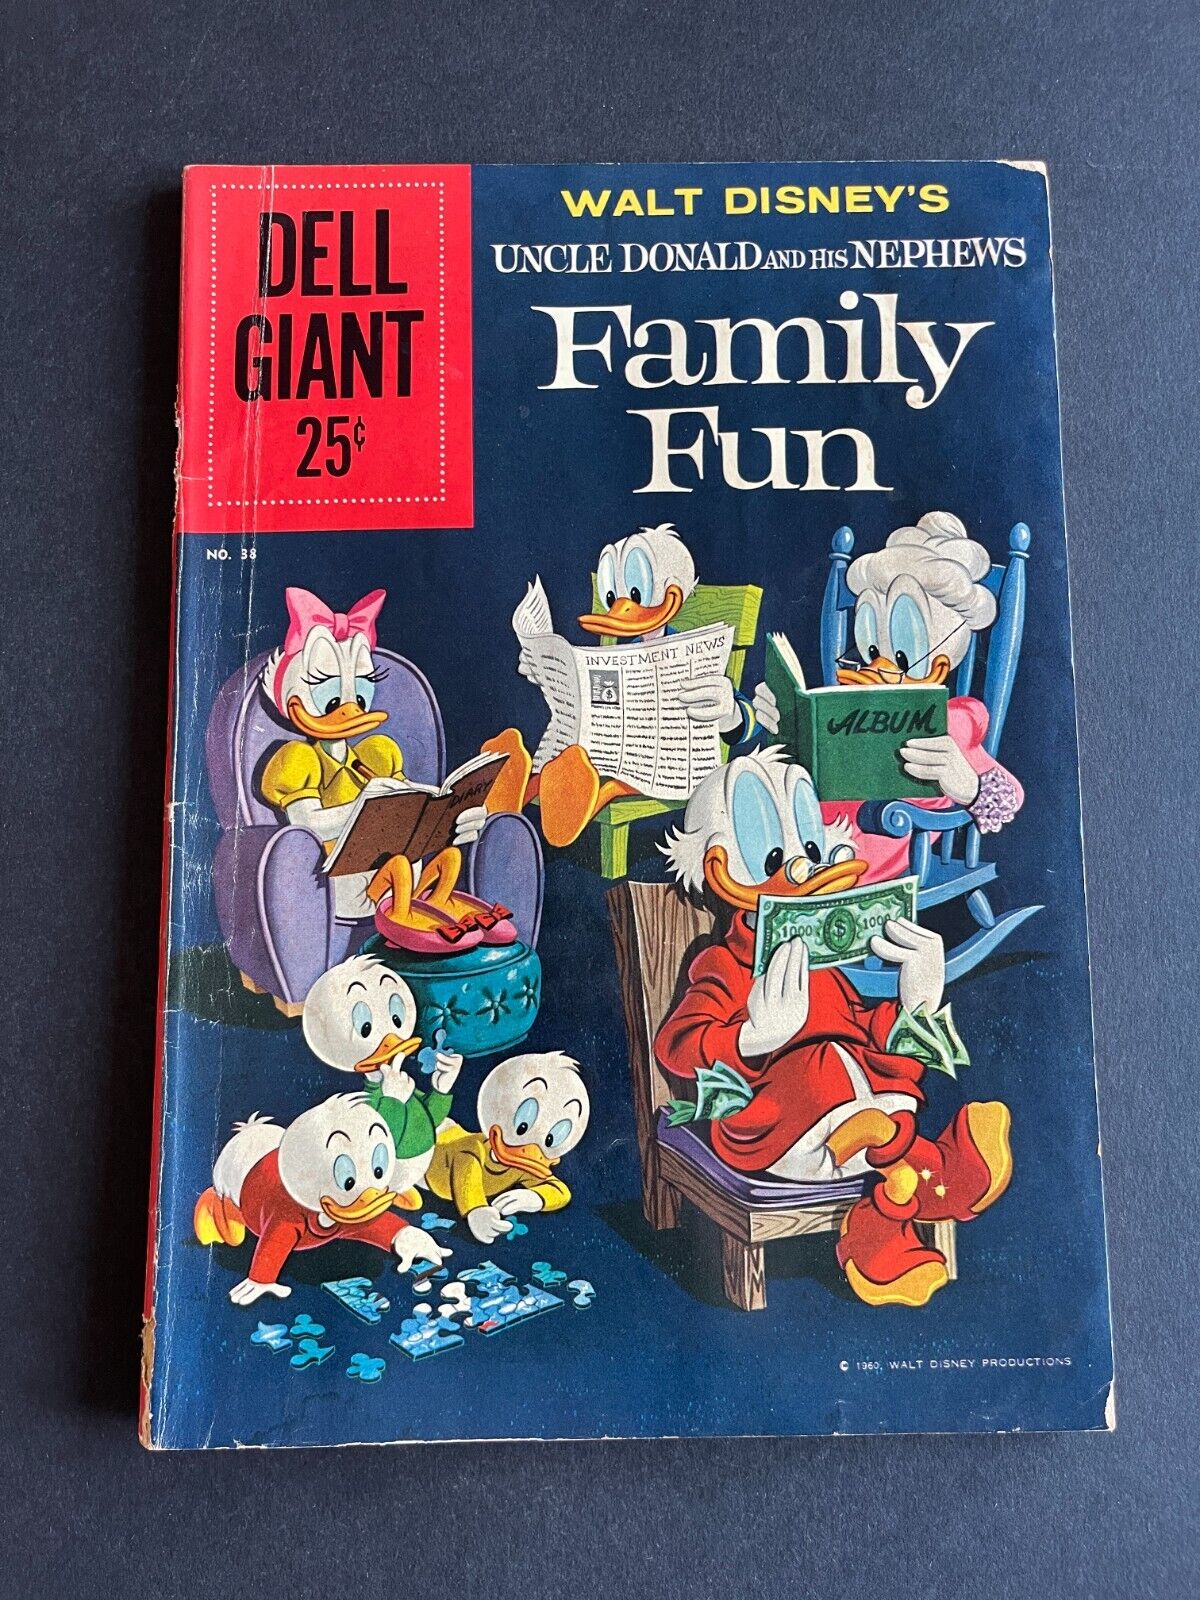 Dell Giant #38 - Uncle Donald And His Nephews Family (Dell, 1960) VG-